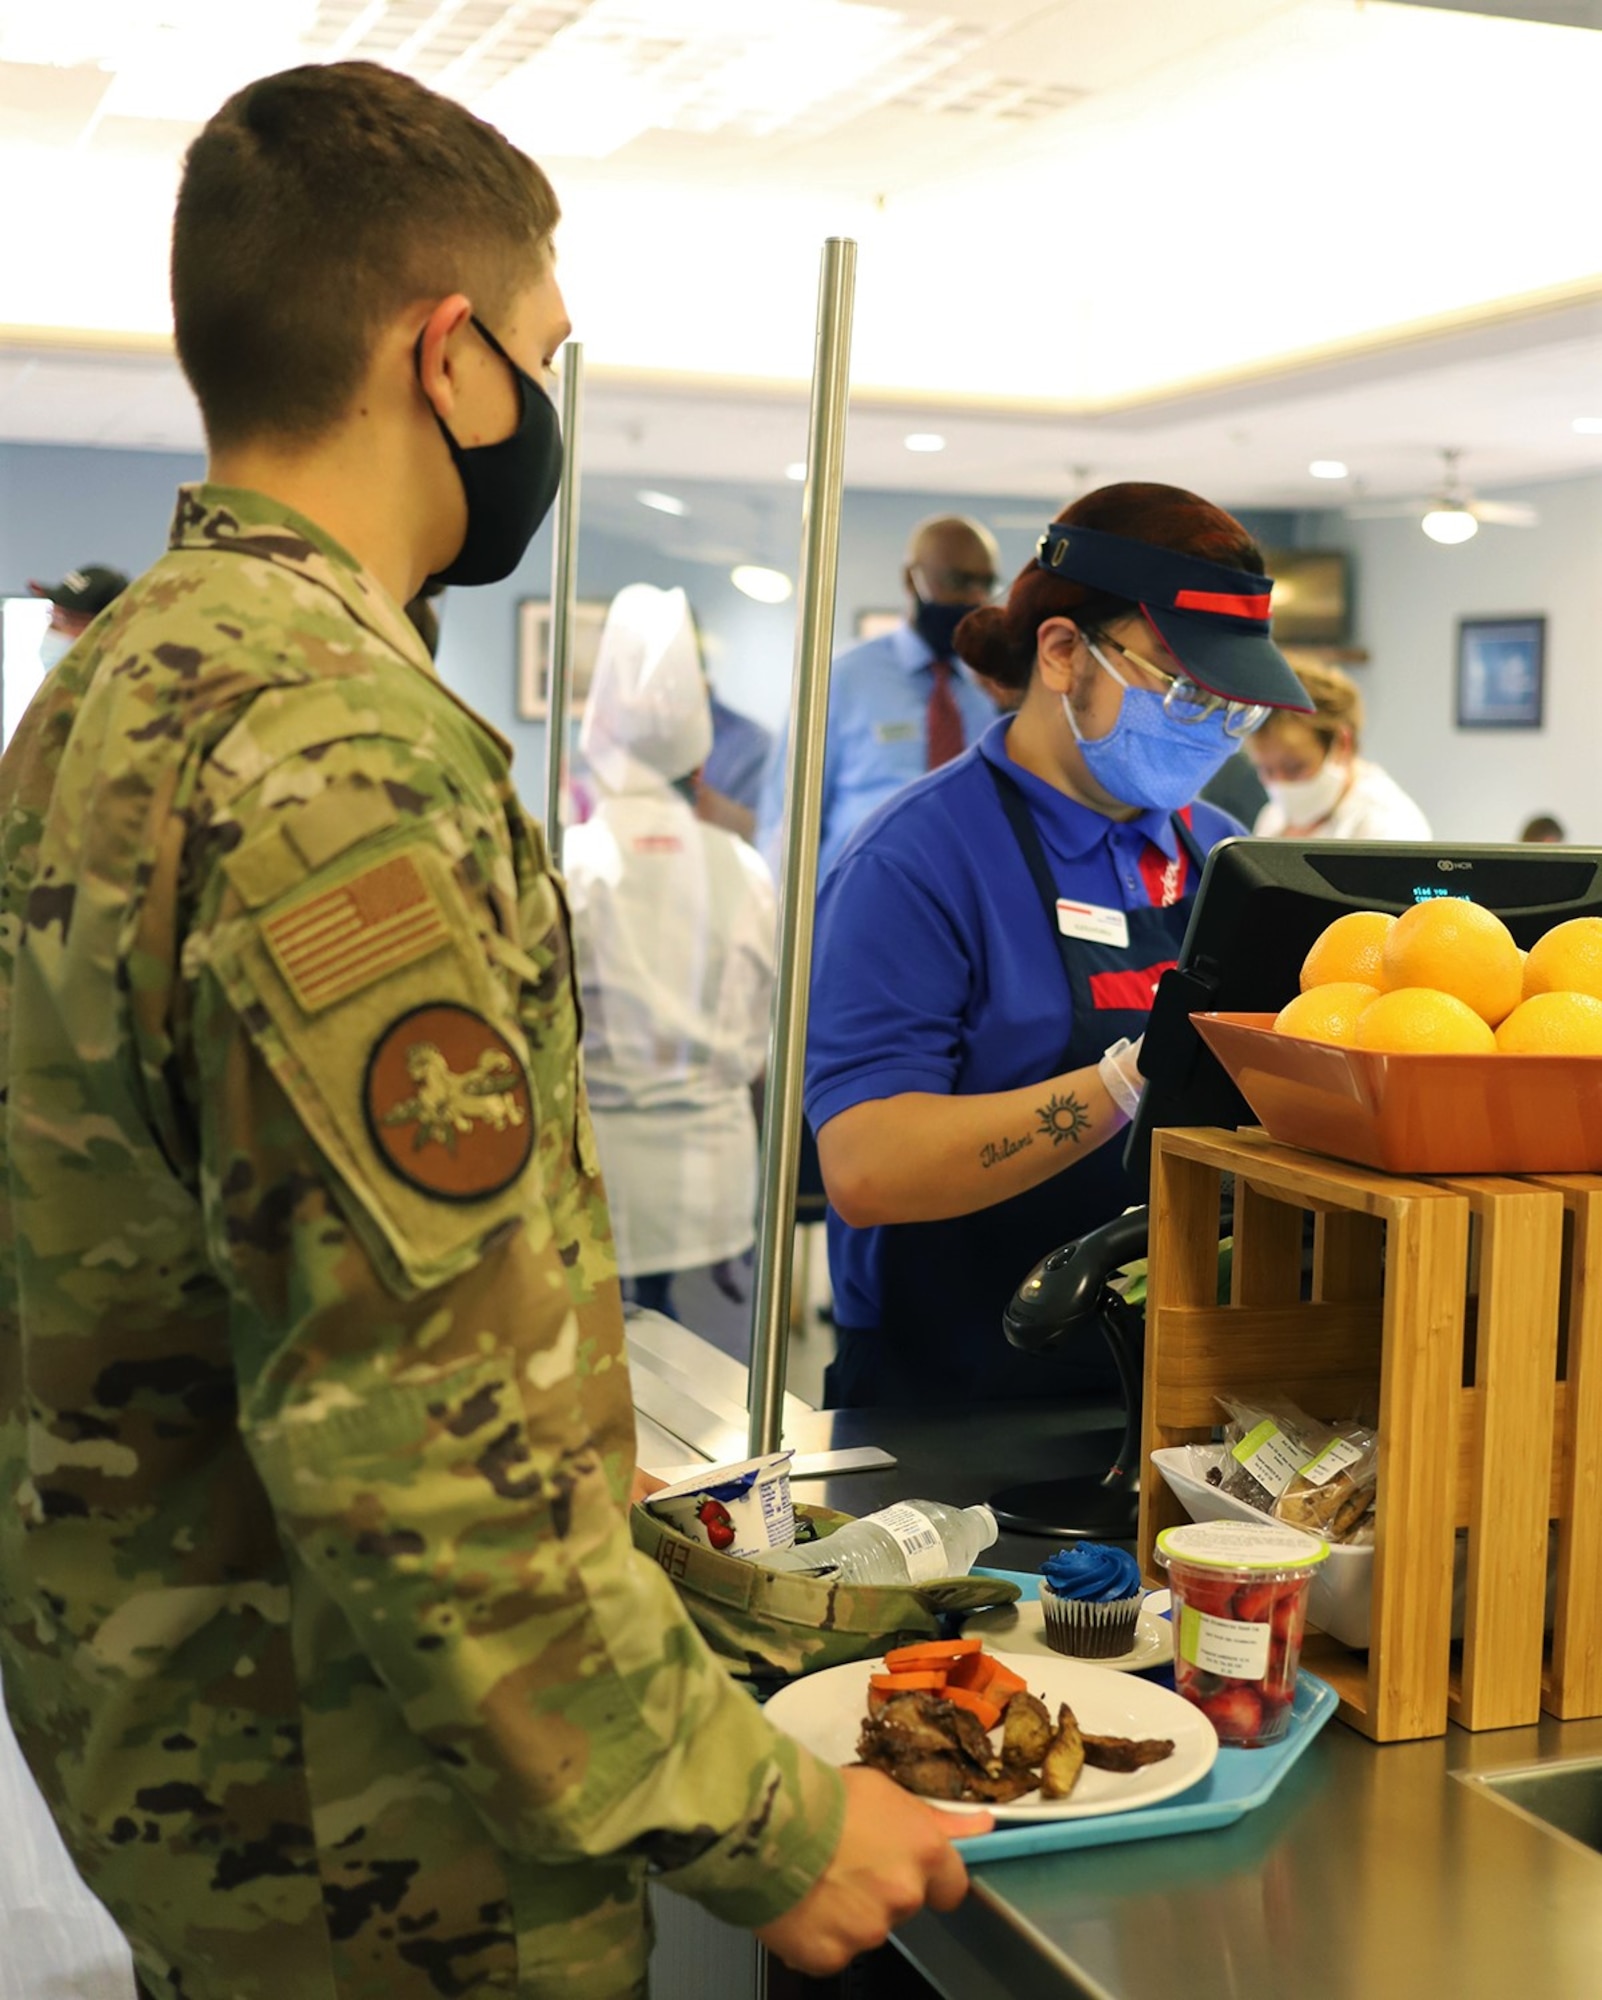 A Sodexo employee enters in a student’s lunch at the newly reopened The Beachcombers dining facility at Vandenberg AFB, California, Aug. 6, 2020.